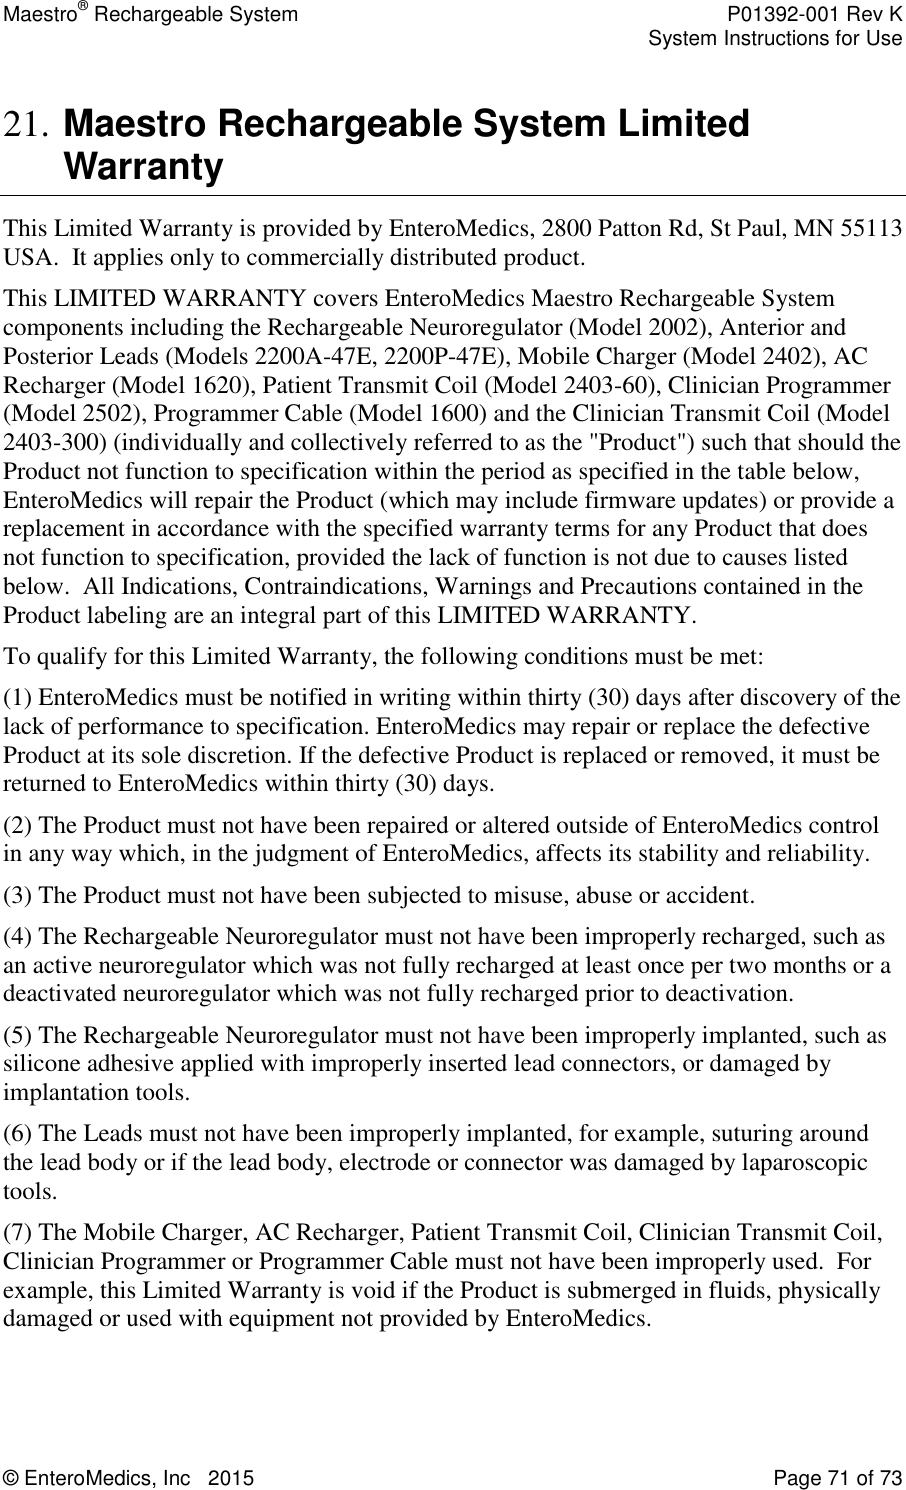 Maestro® Rechargeable System    P01392-001 Rev K     System Instructions for Use  © EnteroMedics, Inc   2015  Page 71 of 73  21. Maestro Rechargeable System Limited Warranty This Limited Warranty is provided by EnteroMedics, 2800 Patton Rd, St Paul, MN 55113 USA.  It applies only to commercially distributed product.  This LIMITED WARRANTY covers EnteroMedics Maestro Rechargeable System components including the Rechargeable Neuroregulator (Model 2002), Anterior and Posterior Leads (Models 2200A-47E, 2200P-47E), Mobile Charger (Model 2402), AC Recharger (Model 1620), Patient Transmit Coil (Model 2403-60), Clinician Programmer (Model 2502), Programmer Cable (Model 1600) and the Clinician Transmit Coil (Model 2403-300) (individually and collectively referred to as the &quot;Product&quot;) such that should the Product not function to specification within the period as specified in the table below, EnteroMedics will repair the Product (which may include firmware updates) or provide a replacement in accordance with the specified warranty terms for any Product that does not function to specification, provided the lack of function is not due to causes listed below.  All Indications, Contraindications, Warnings and Precautions contained in the Product labeling are an integral part of this LIMITED WARRANTY.  To qualify for this Limited Warranty, the following conditions must be met: (1) EnteroMedics must be notified in writing within thirty (30) days after discovery of the lack of performance to specification. EnteroMedics may repair or replace the defective Product at its sole discretion. If the defective Product is replaced or removed, it must be returned to EnteroMedics within thirty (30) days.  (2) The Product must not have been repaired or altered outside of EnteroMedics control in any way which, in the judgment of EnteroMedics, affects its stability and reliability.  (3) The Product must not have been subjected to misuse, abuse or accident. (4) The Rechargeable Neuroregulator must not have been improperly recharged, such as an active neuroregulator which was not fully recharged at least once per two months or a deactivated neuroregulator which was not fully recharged prior to deactivation. (5) The Rechargeable Neuroregulator must not have been improperly implanted, such as silicone adhesive applied with improperly inserted lead connectors, or damaged by implantation tools. (6) The Leads must not have been improperly implanted, for example, suturing around the lead body or if the lead body, electrode or connector was damaged by laparoscopic tools. (7) The Mobile Charger, AC Recharger, Patient Transmit Coil, Clinician Transmit Coil, Clinician Programmer or Programmer Cable must not have been improperly used.  For example, this Limited Warranty is void if the Product is submerged in fluids, physically damaged or used with equipment not provided by EnteroMedics.  